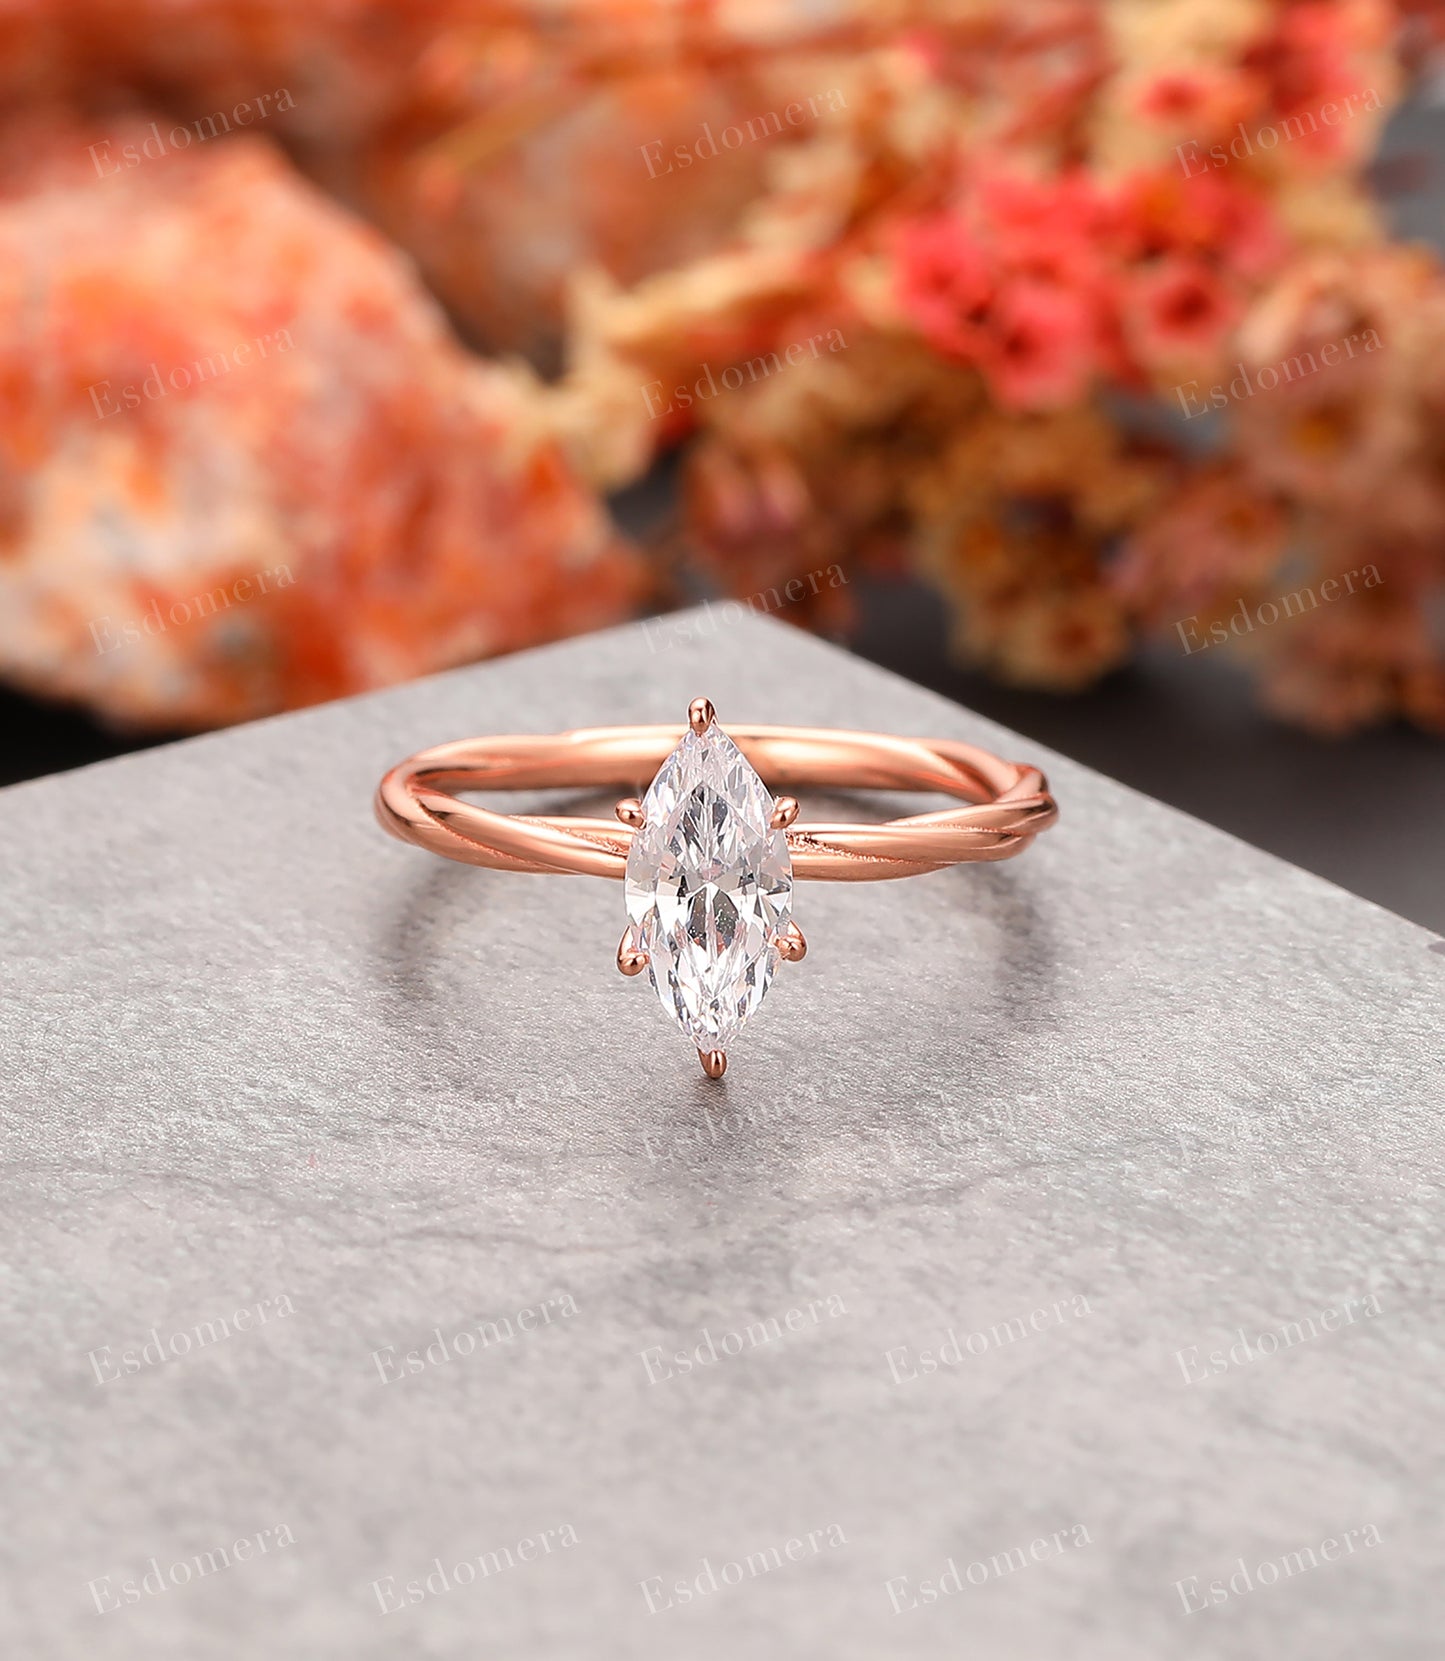 Marquise Cut 5x10mm Moissanite Solitaire Promise Ring, 14k Rose Gold Twist Shank Engagement Ring For Her, Birthday Gift